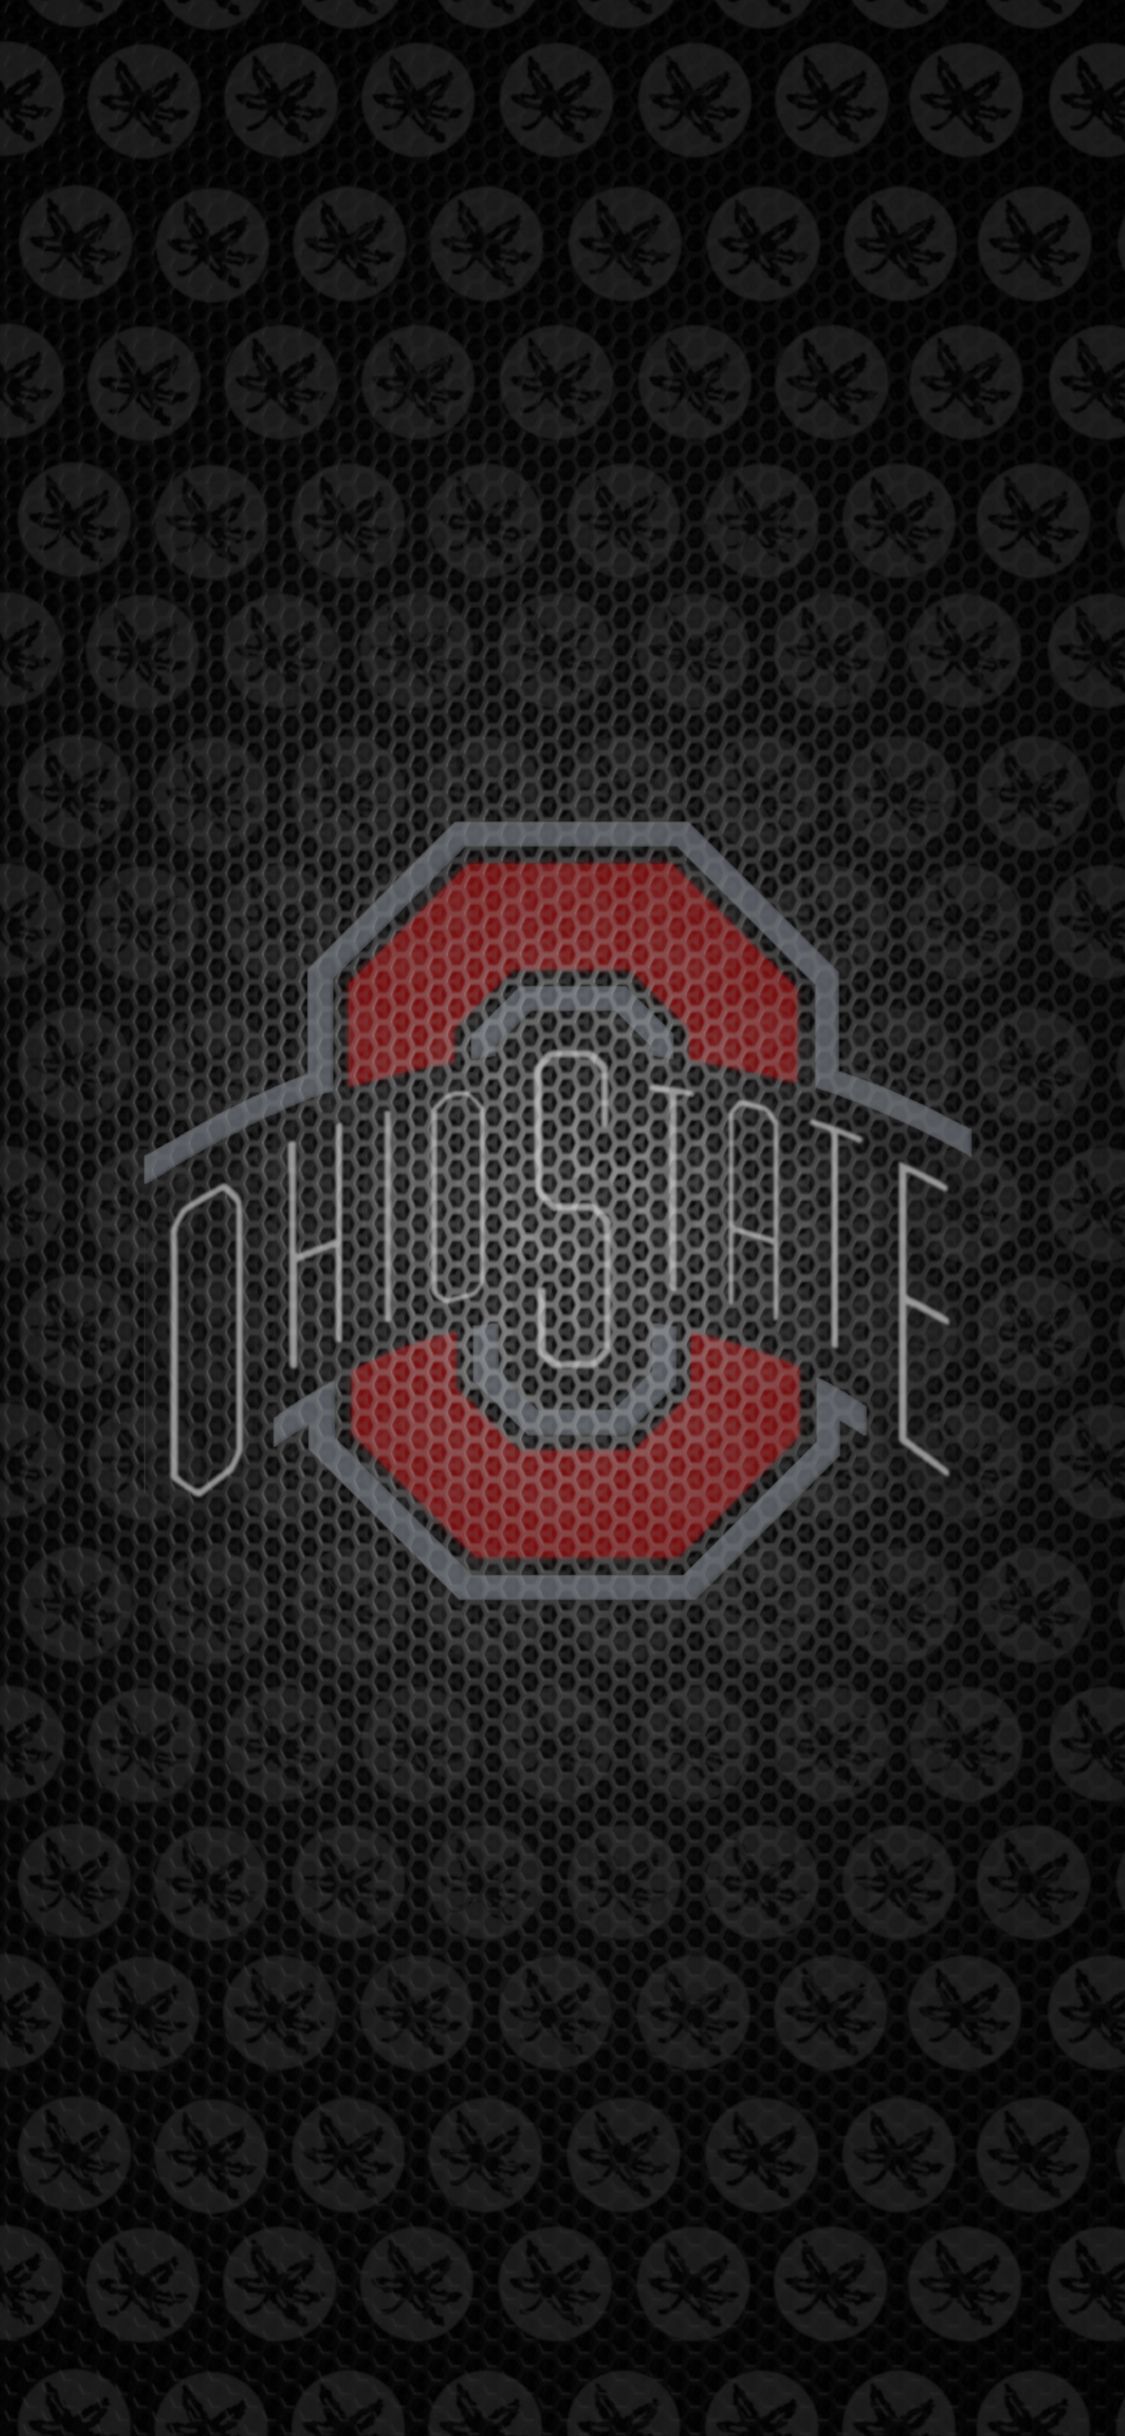 OSU Wallpaper 1050 For iPhone Xs. Wallpaper, Ohio state, Phone wallpaper